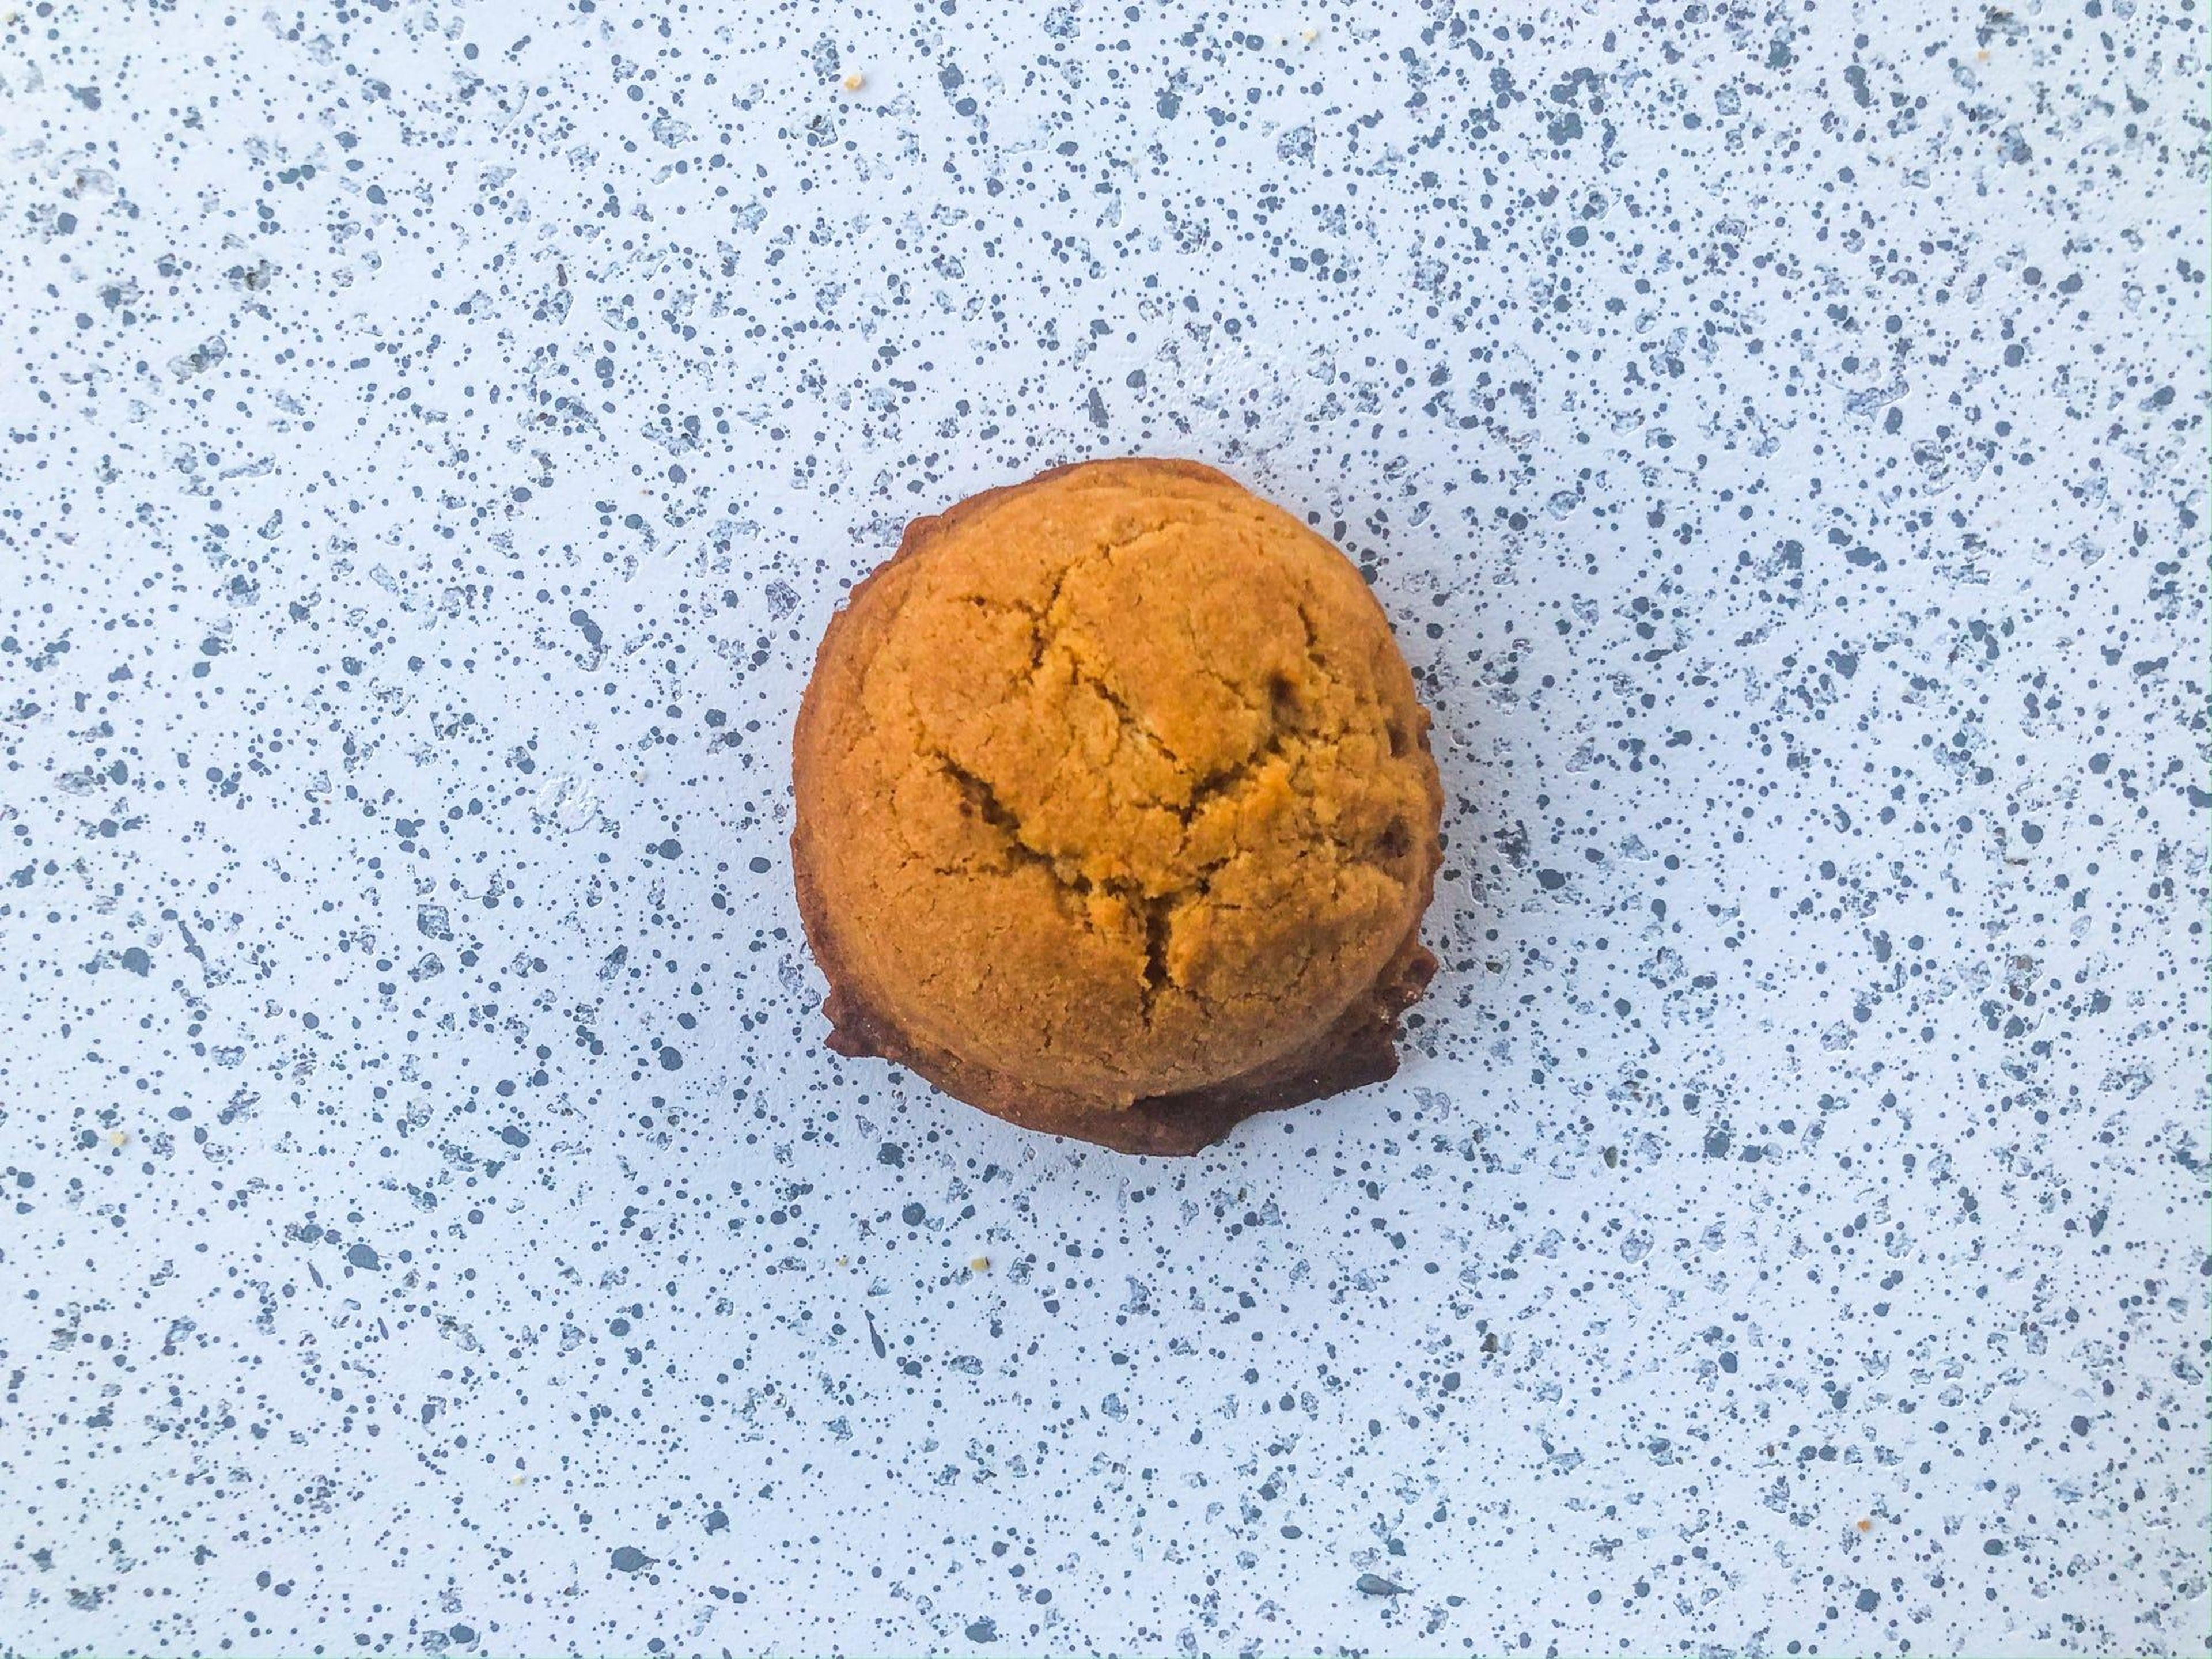 A cookie with too much flour.